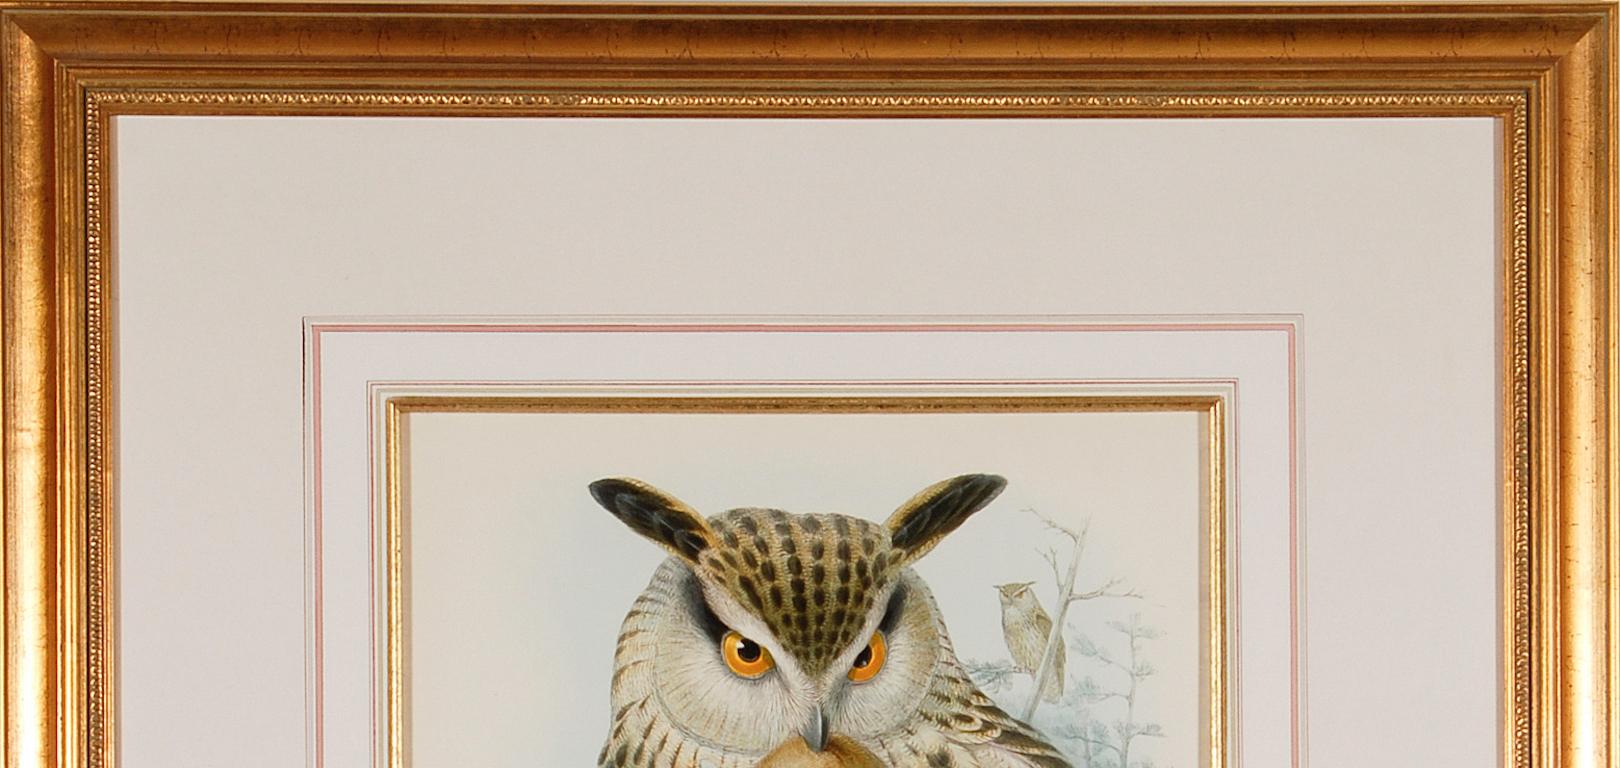 Eagle or Horned Owl: A Framed Original 19th C. Hand-colored Lithograph by Gould - Beige Landscape Print by John Gould and Henry Constantine Richter